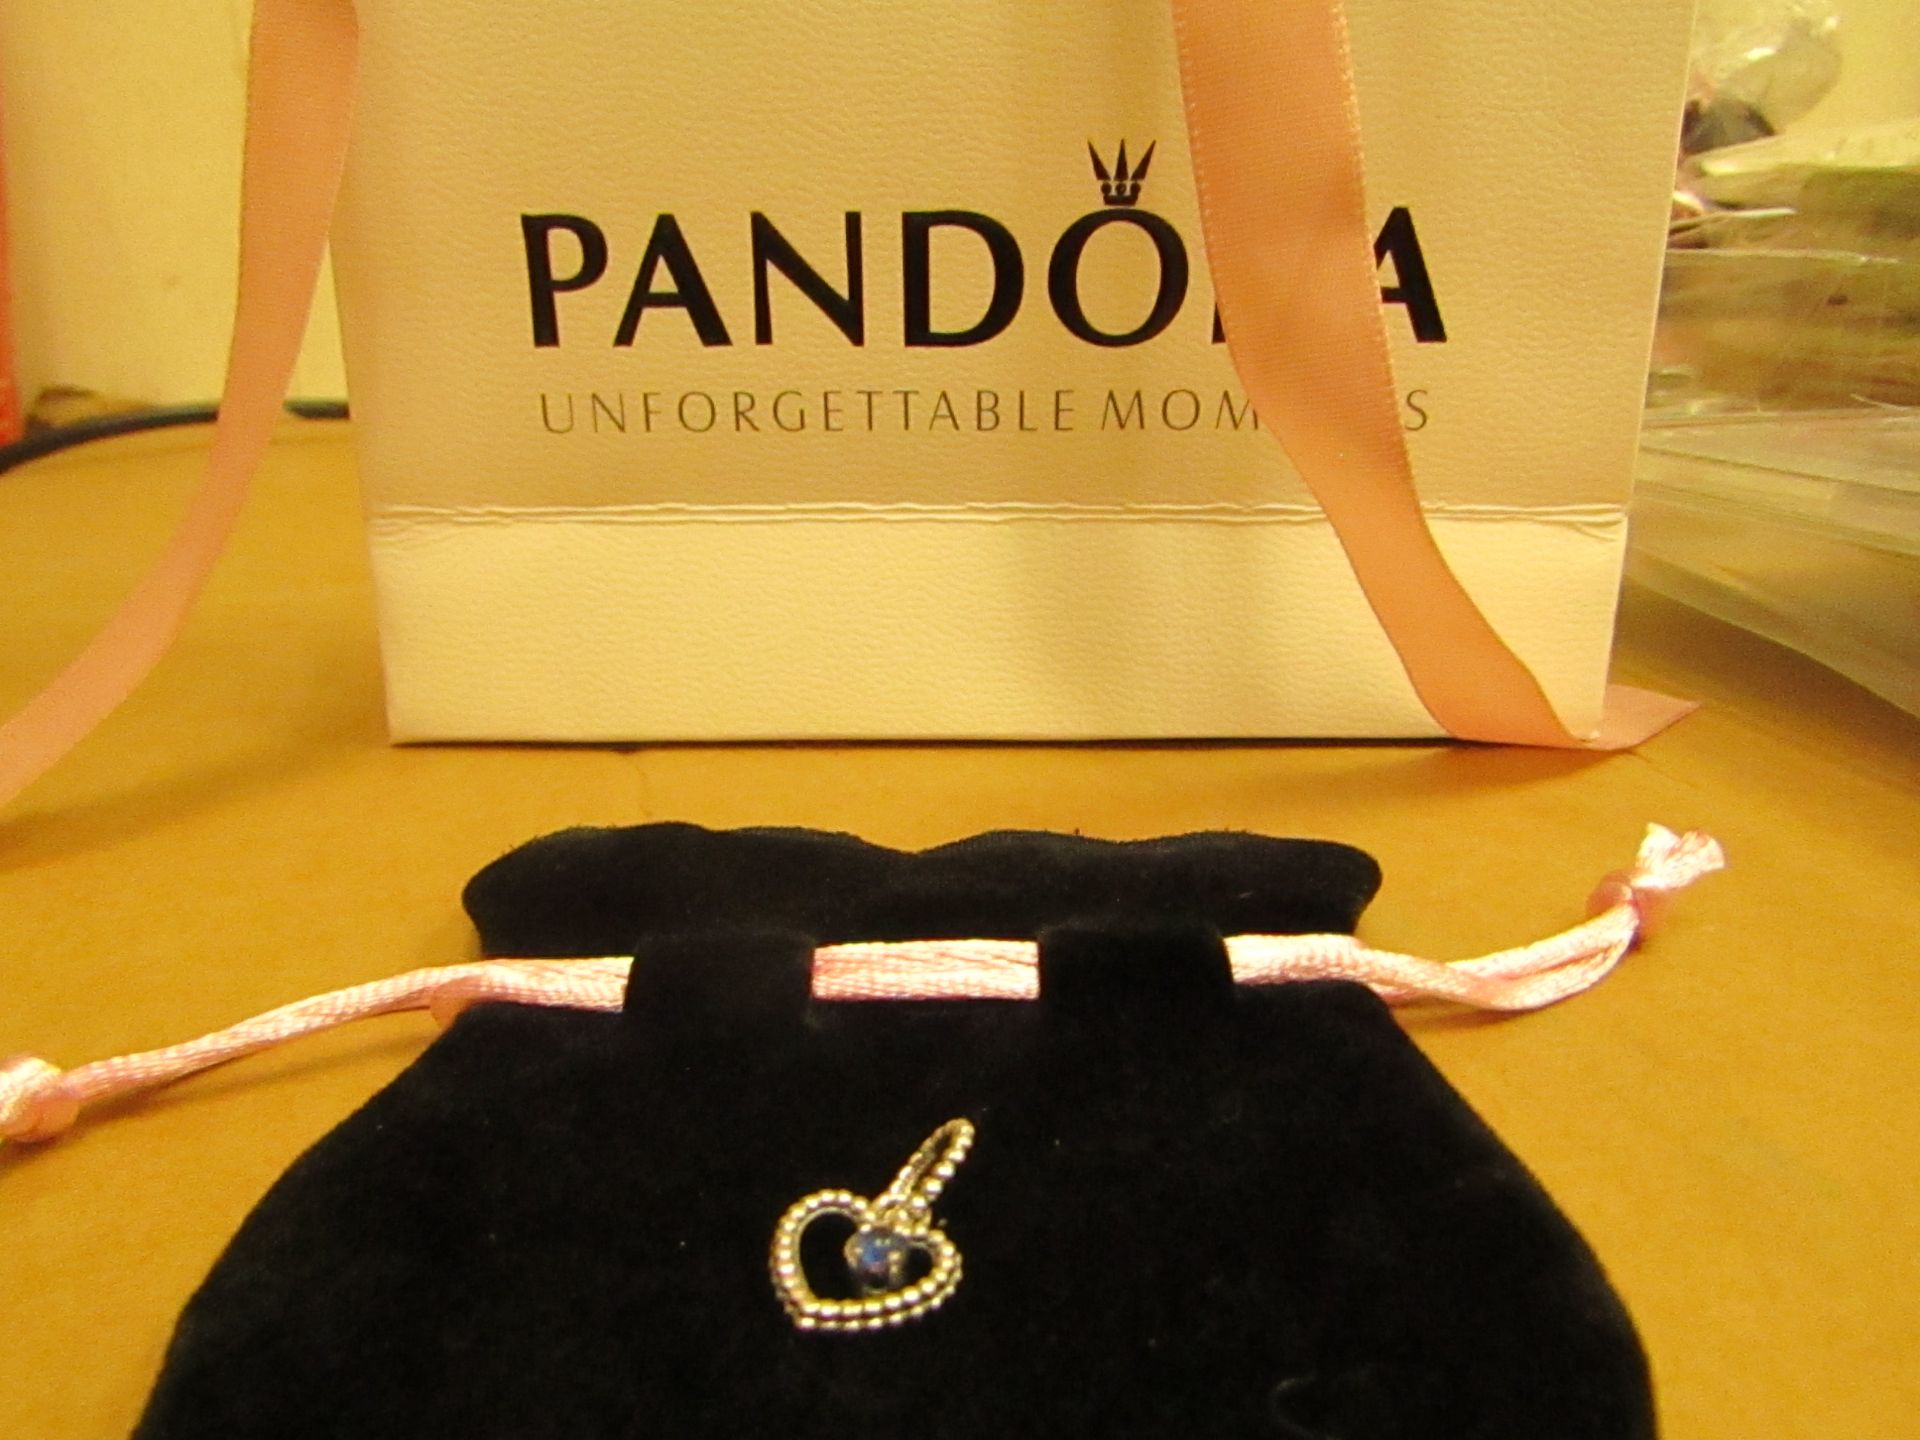 1 x Pandora Blue Birthstone Necklace Pendant with Pandora Pouch & Gift Bag see image for design